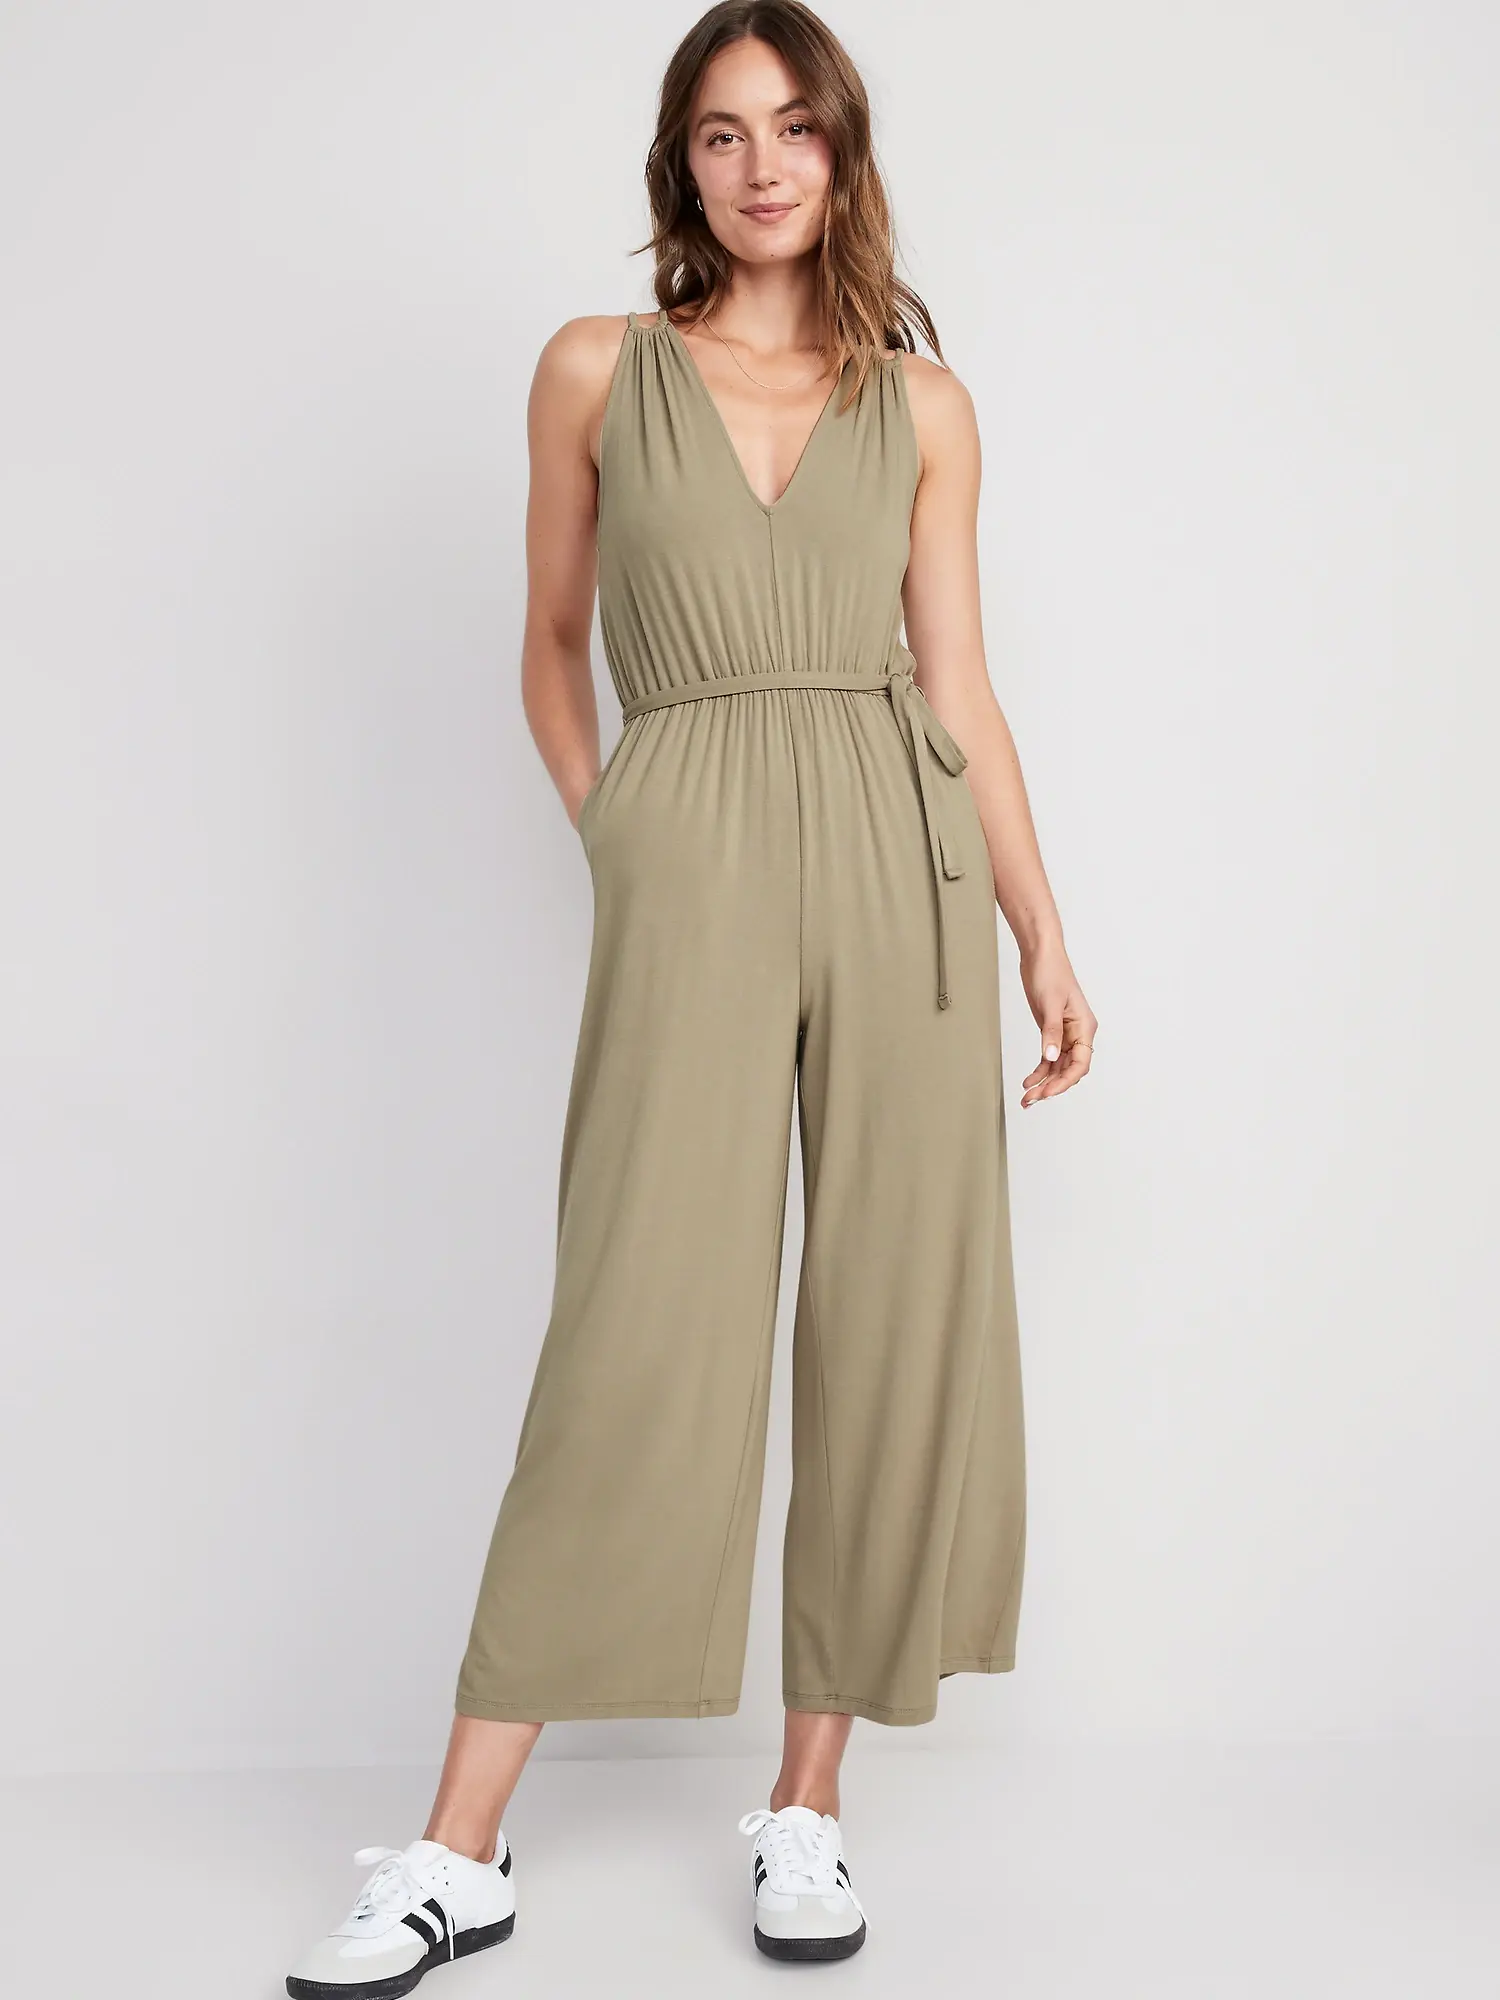 Old Navy - Sleeveless Double-Strap Ankle-Length Jumpsuit for Women